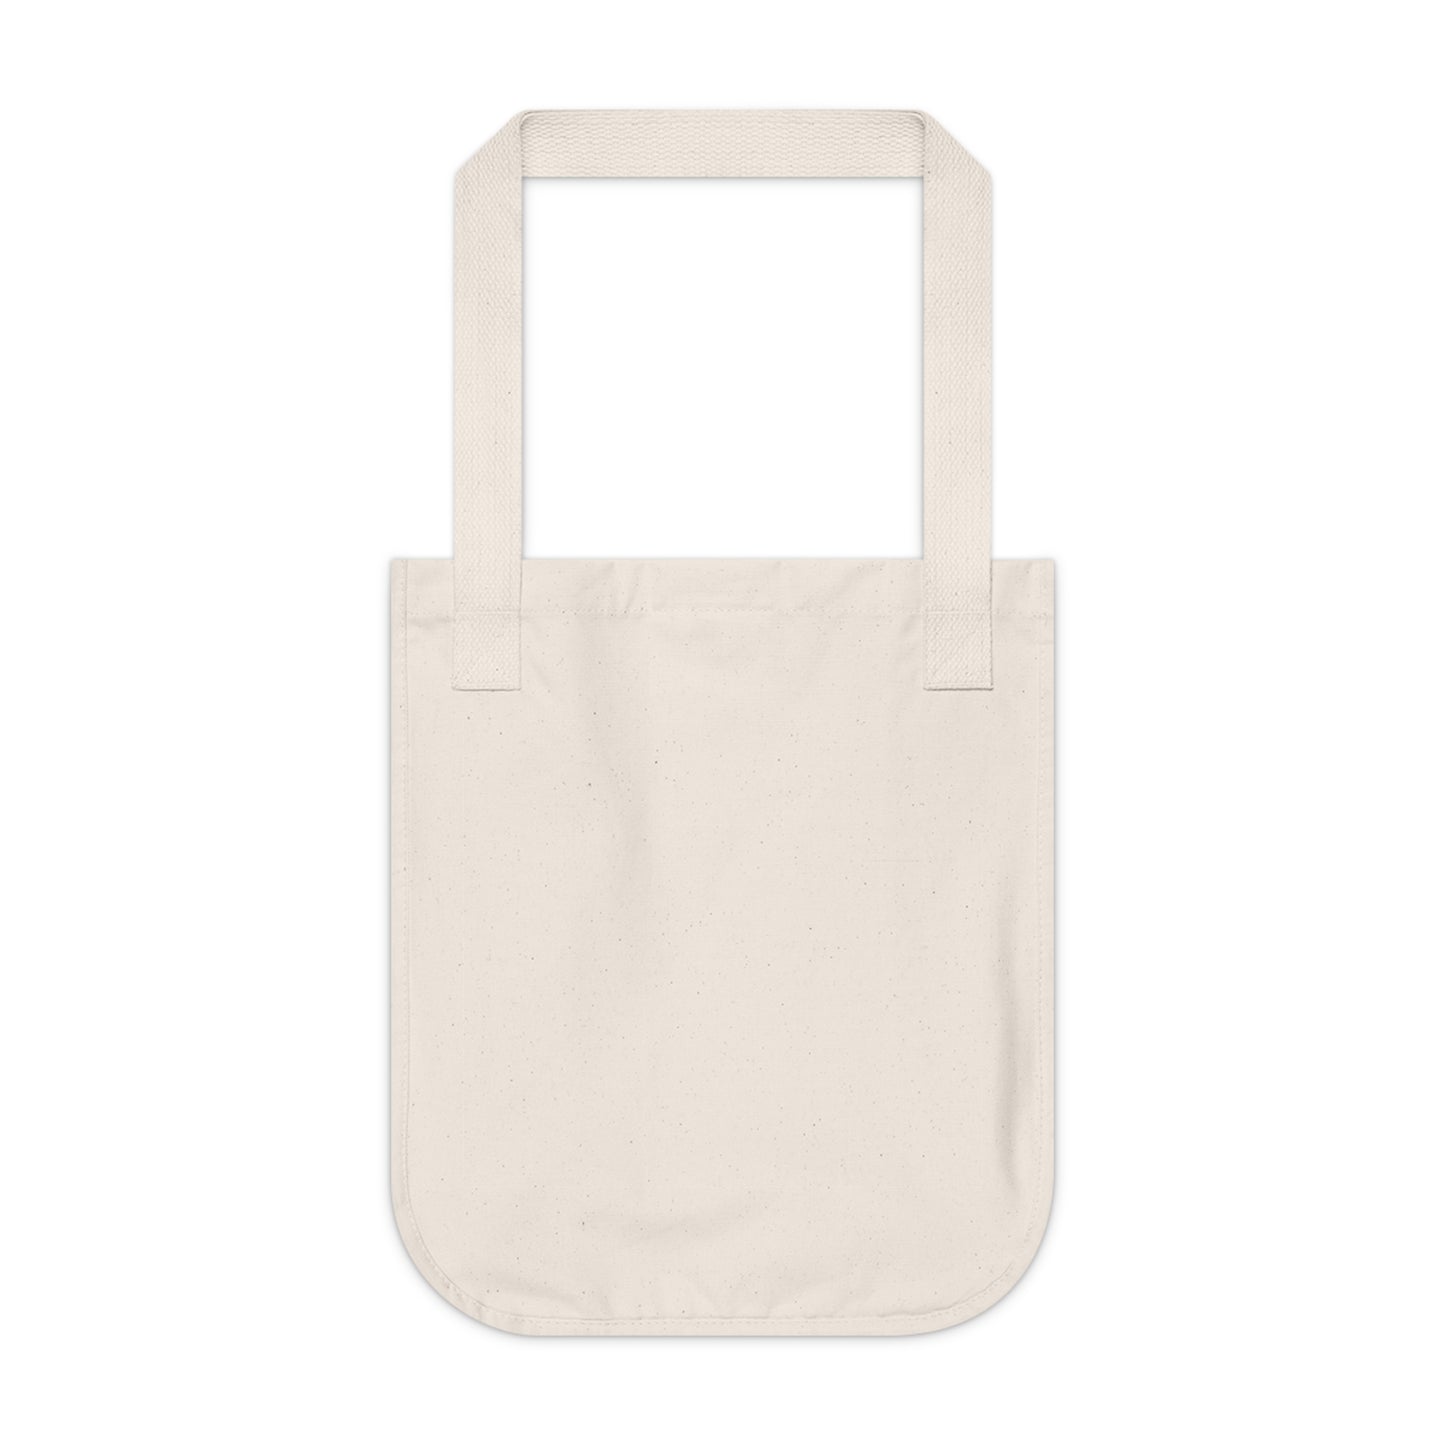 "Abstract Expressionism: Exploring Color and Texture" - Bam Boo! Lifestyle Eco-friendly Tote Bag